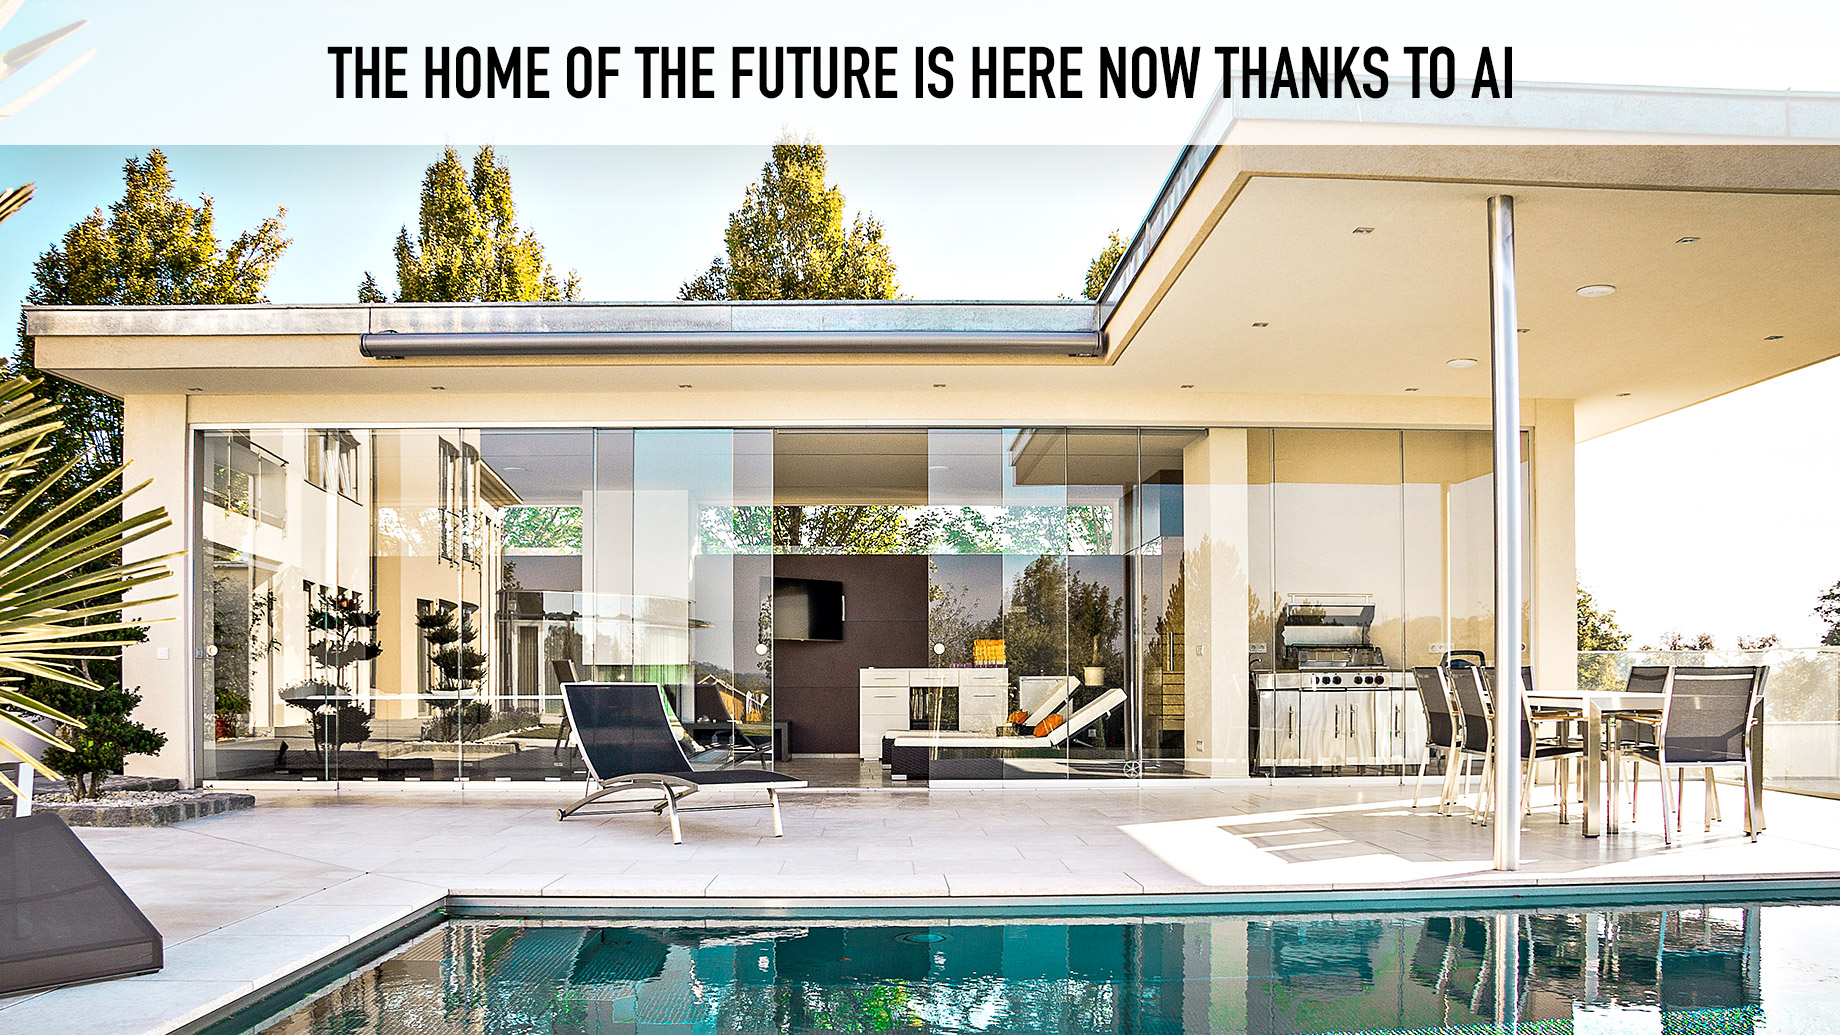 The Home Of The Future Is Here Now Thanks To AI